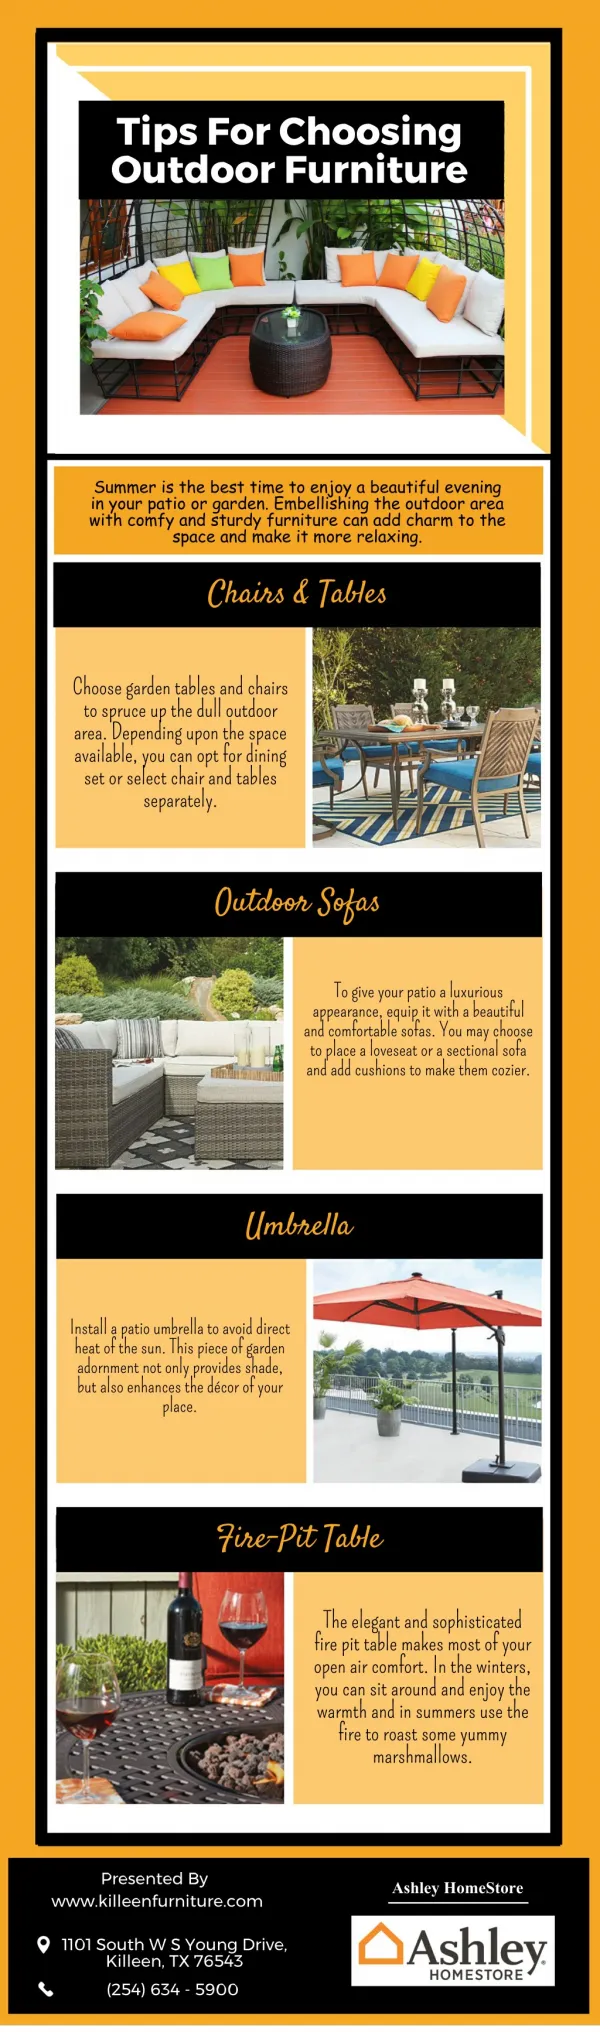 Tips For Choosing Outdoor Furniture